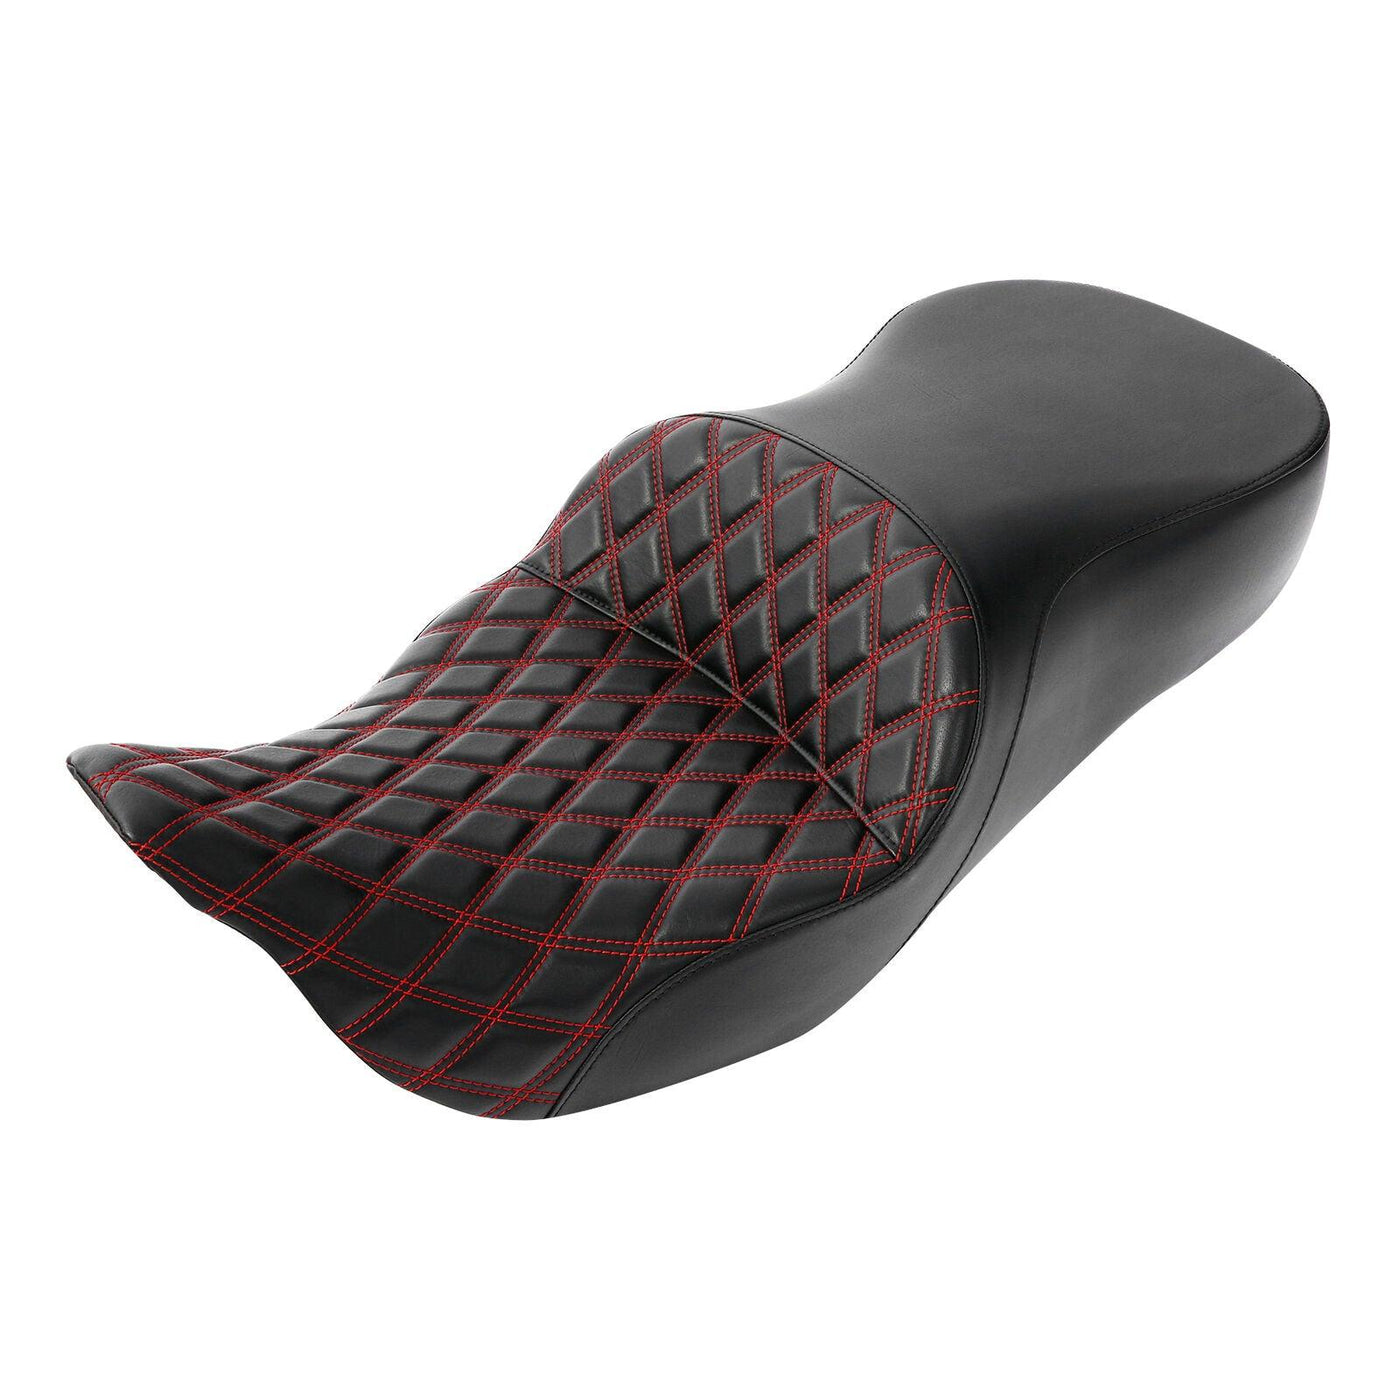 Driver Rider & Passenger Seat Fit For Harley Touring Street Road Glide 2009-2022 - Moto Life Products